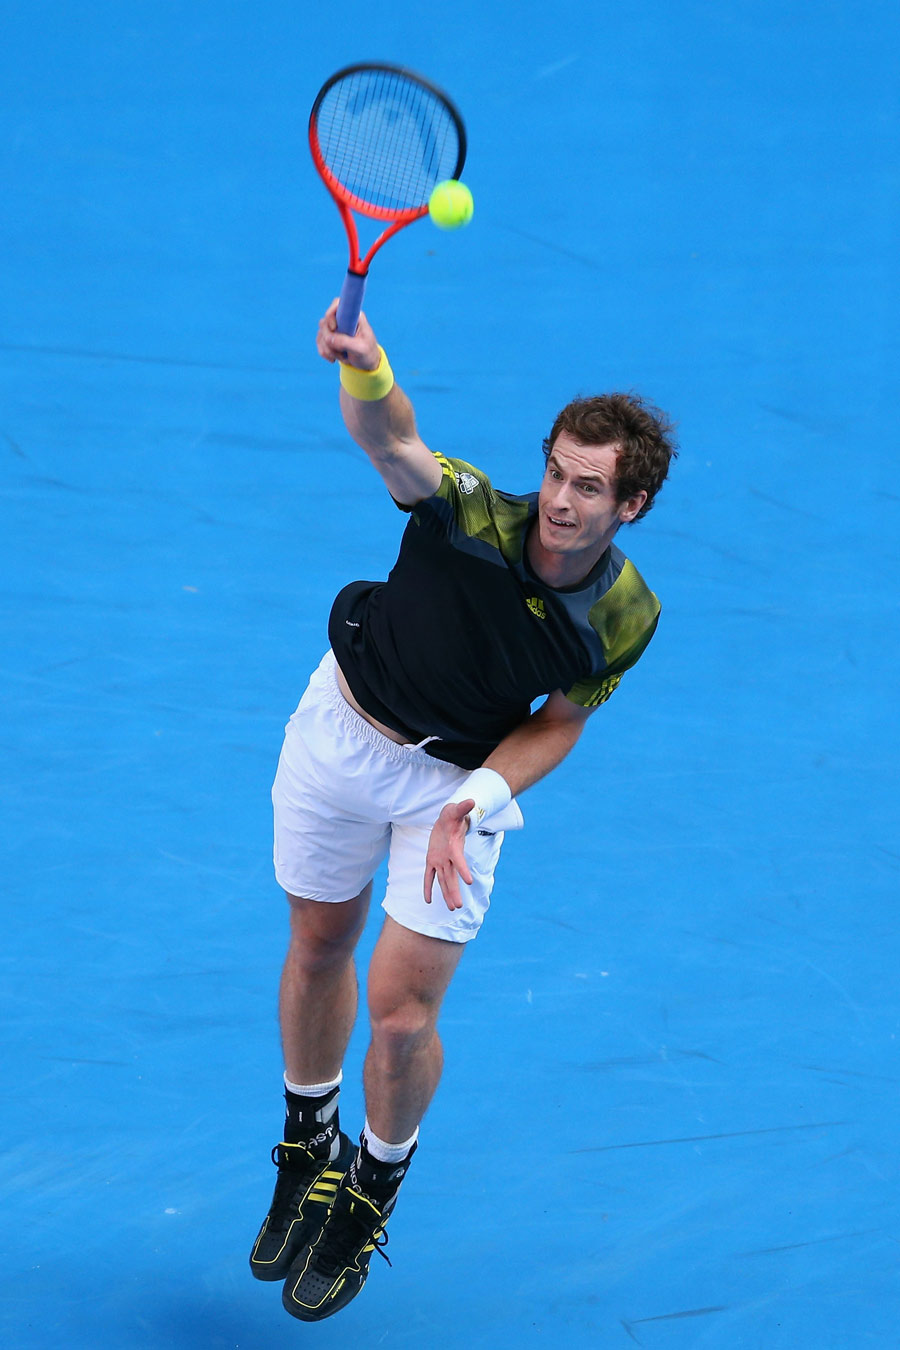 Andy Murray powers down a serve